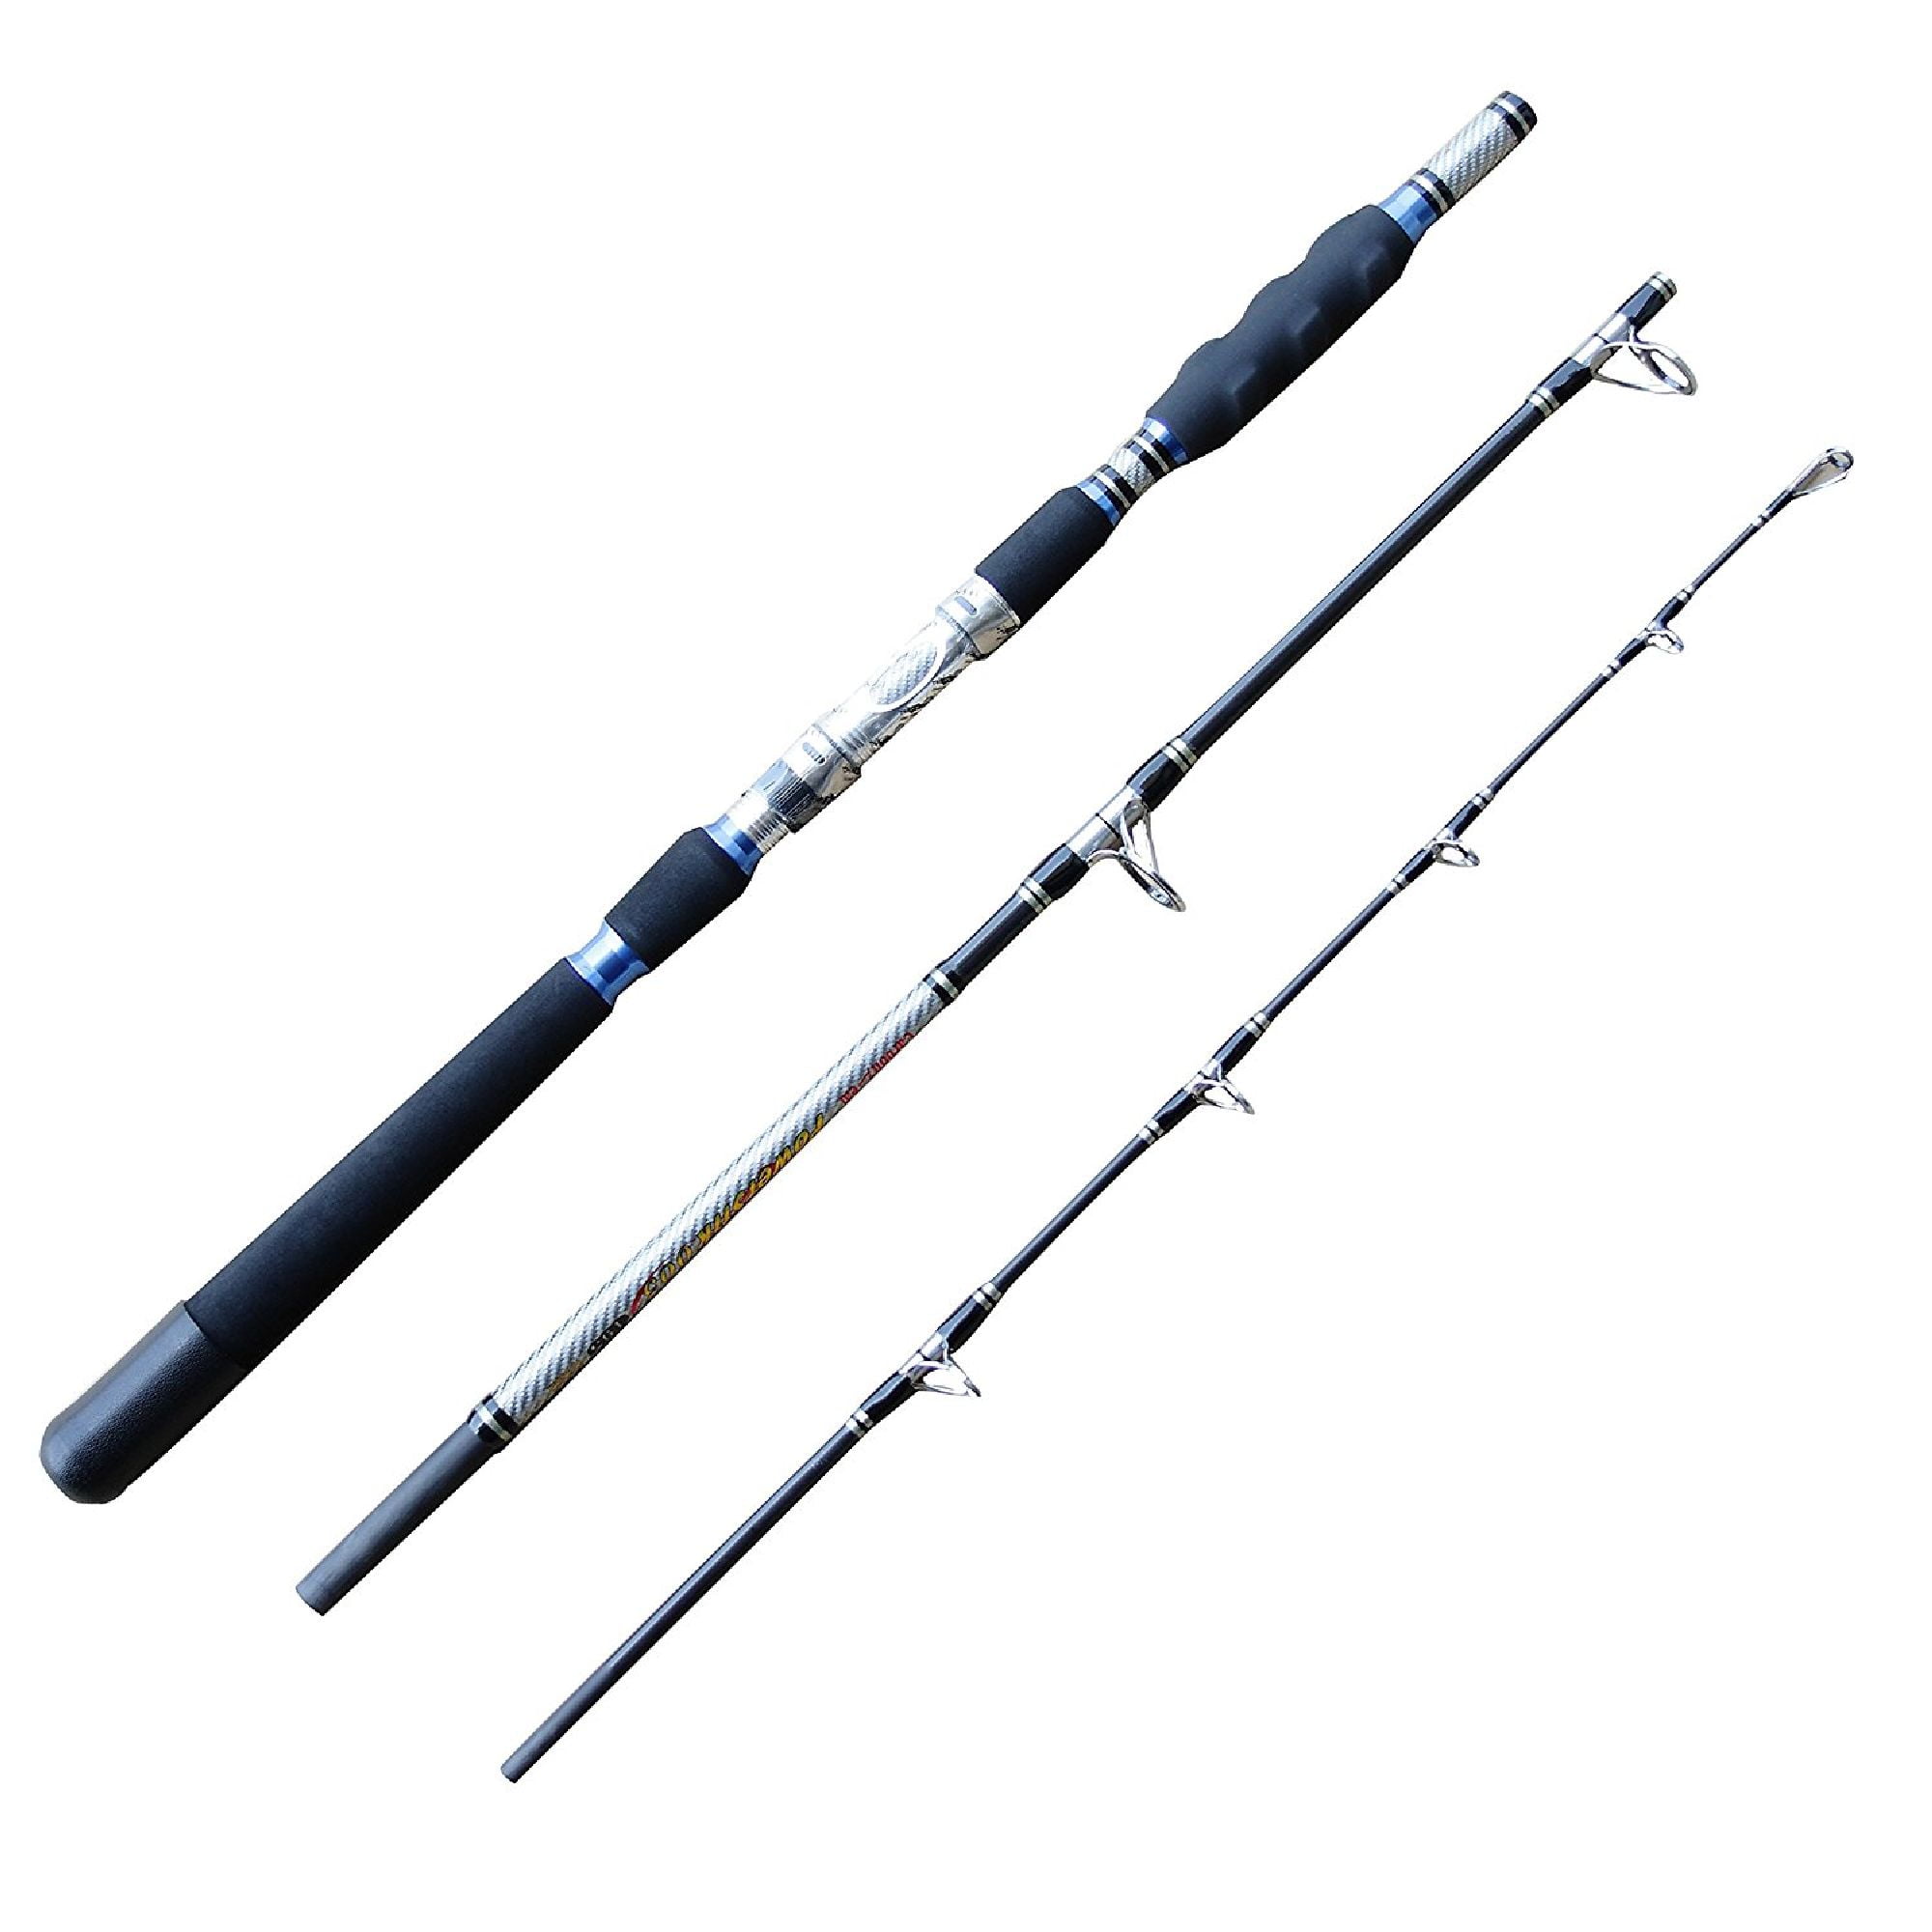 Details about   Fishing Rod With High Quality Fishing Reel,Carbon Fiber Rod Superhard Boat Ice F 